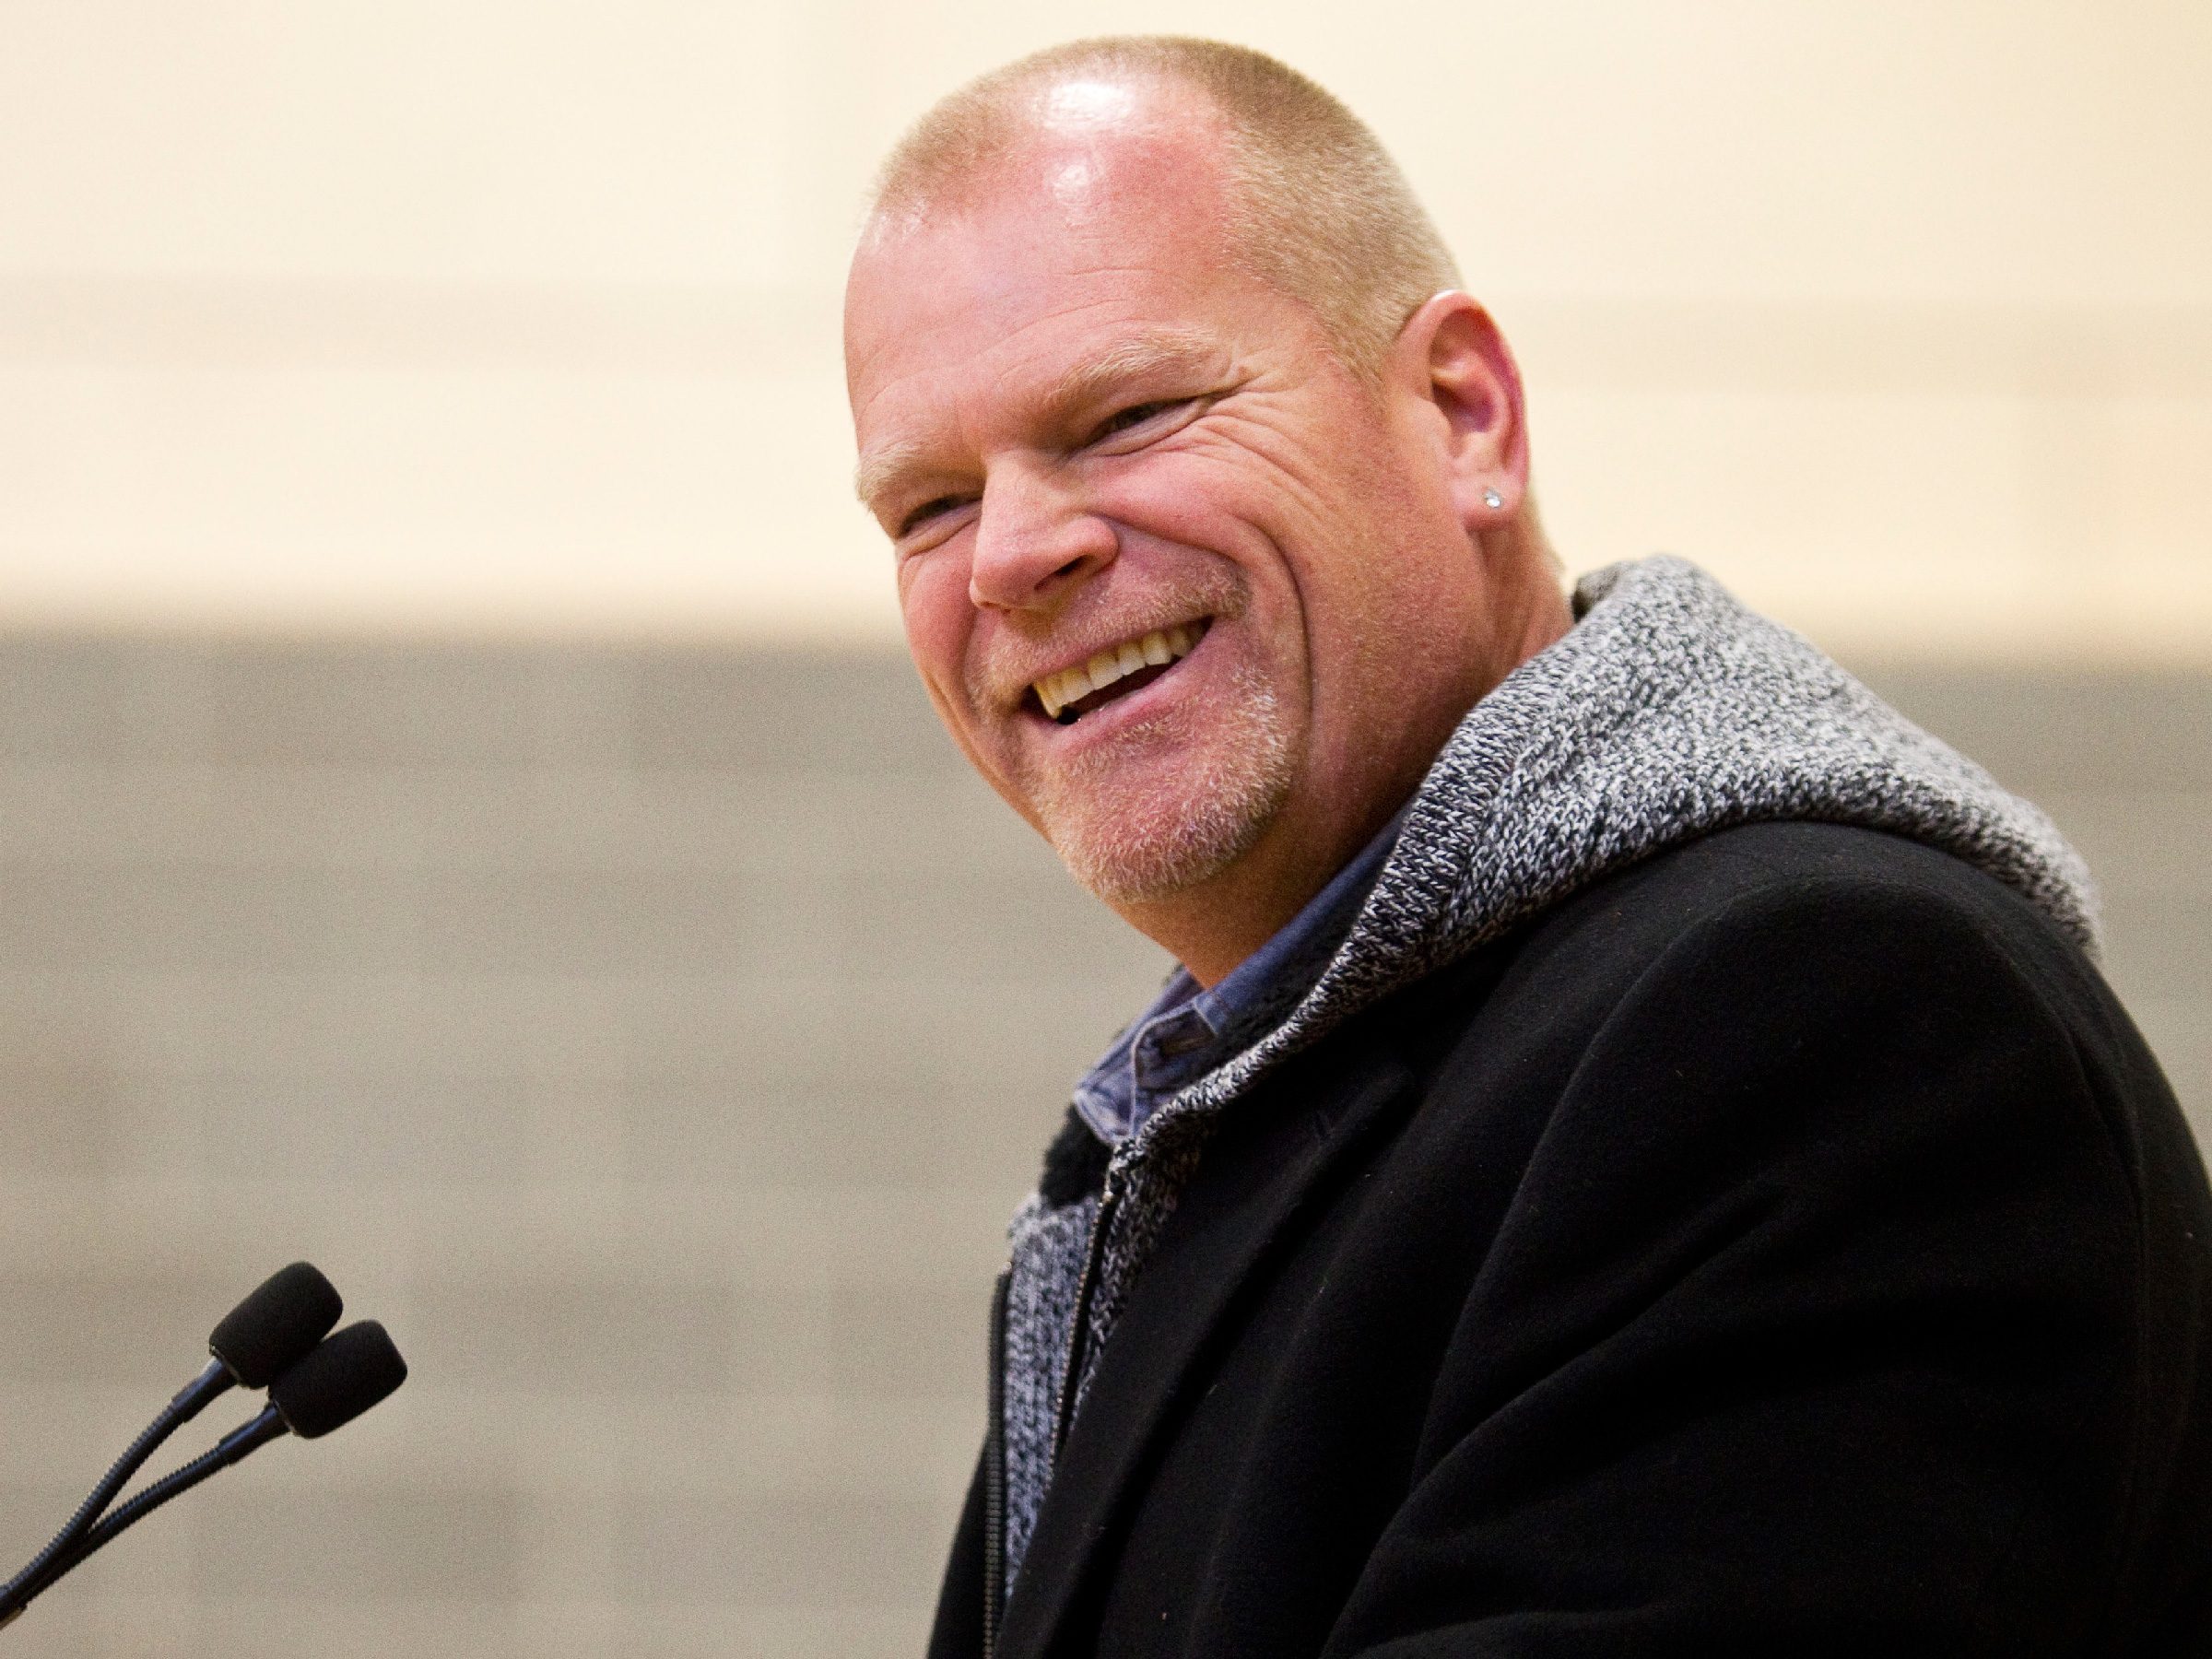 4. Mike Holmes